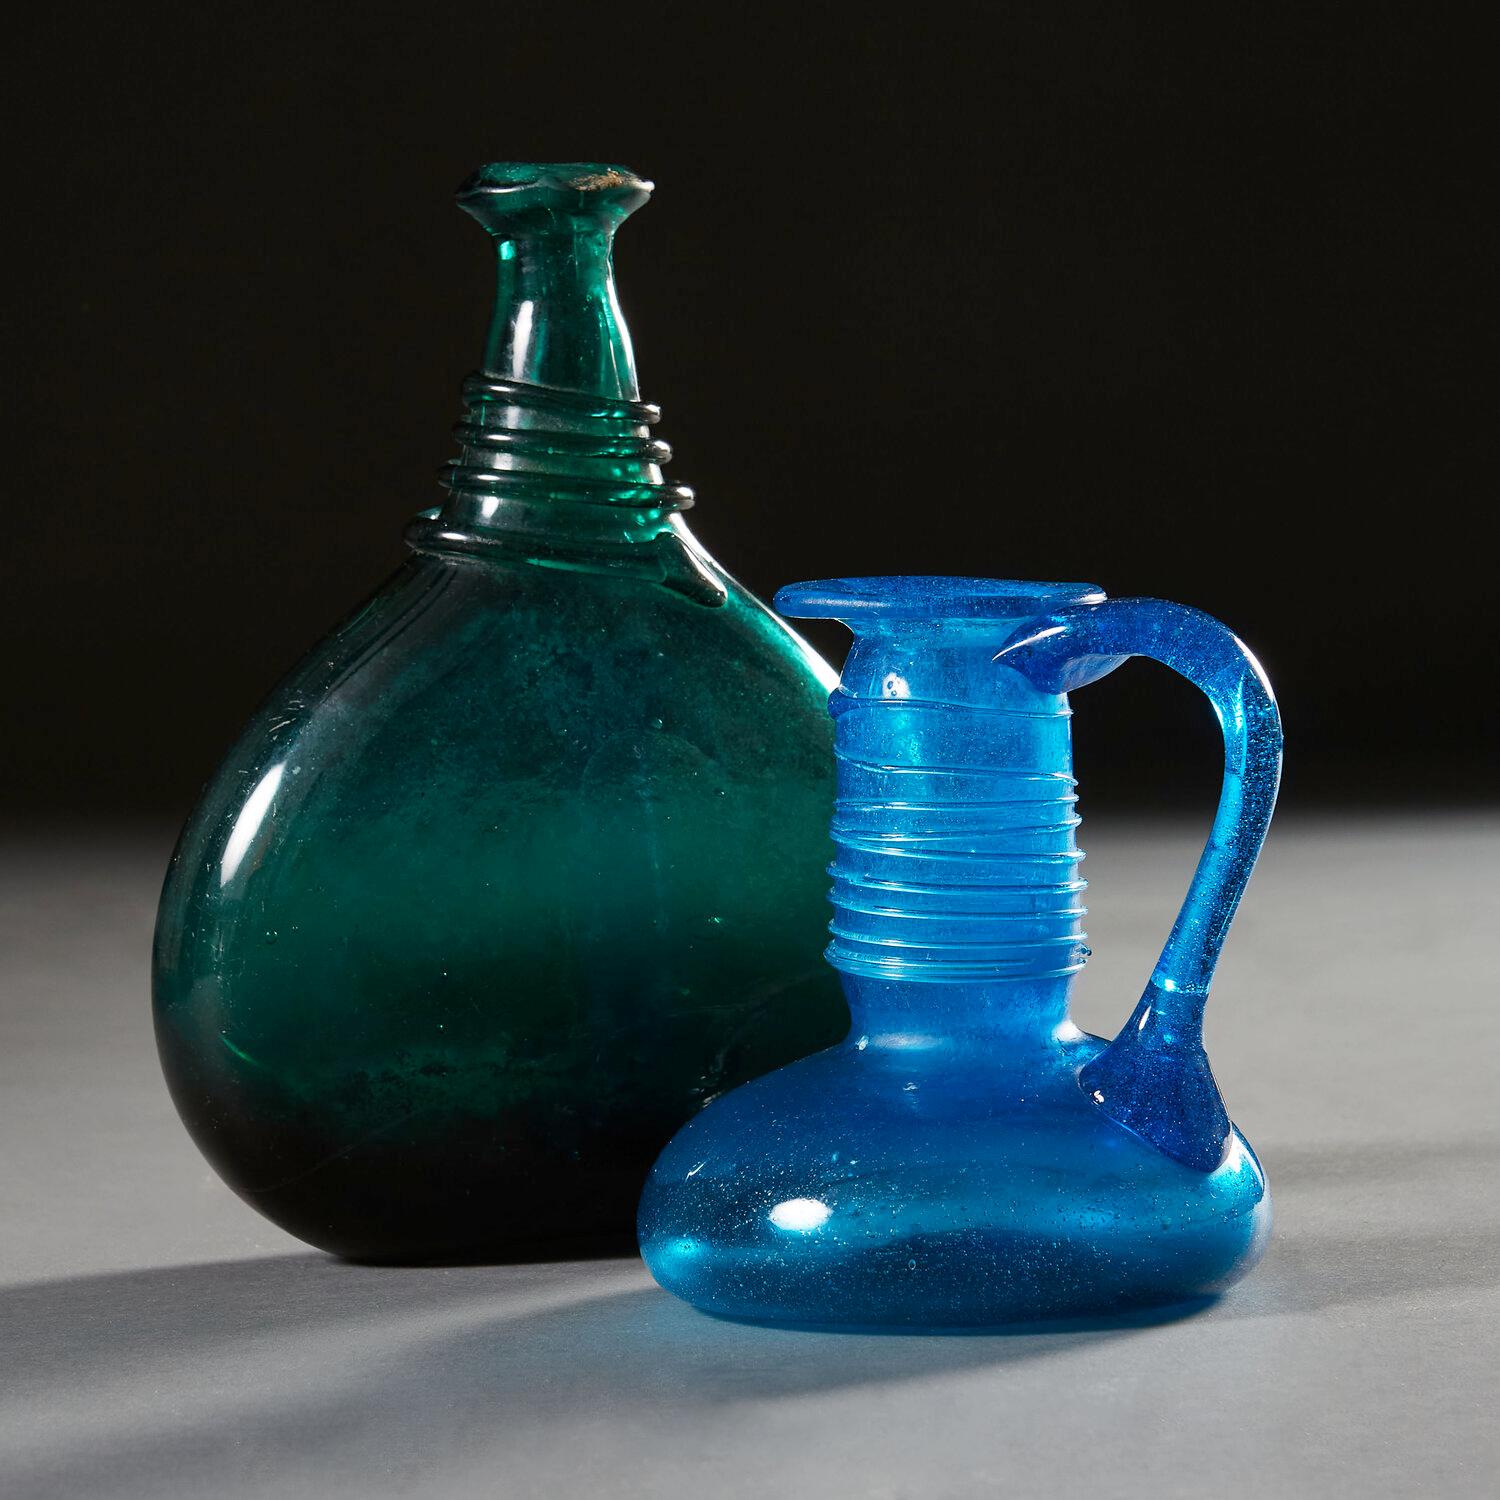 Two late eighteenth century Persian glass vessels, the green bottle with serpent coil decoration to the neck, the blue pitcher also with serpent coil decoration to the neck, with loop handle and flared rim. 

Please note that the measurements